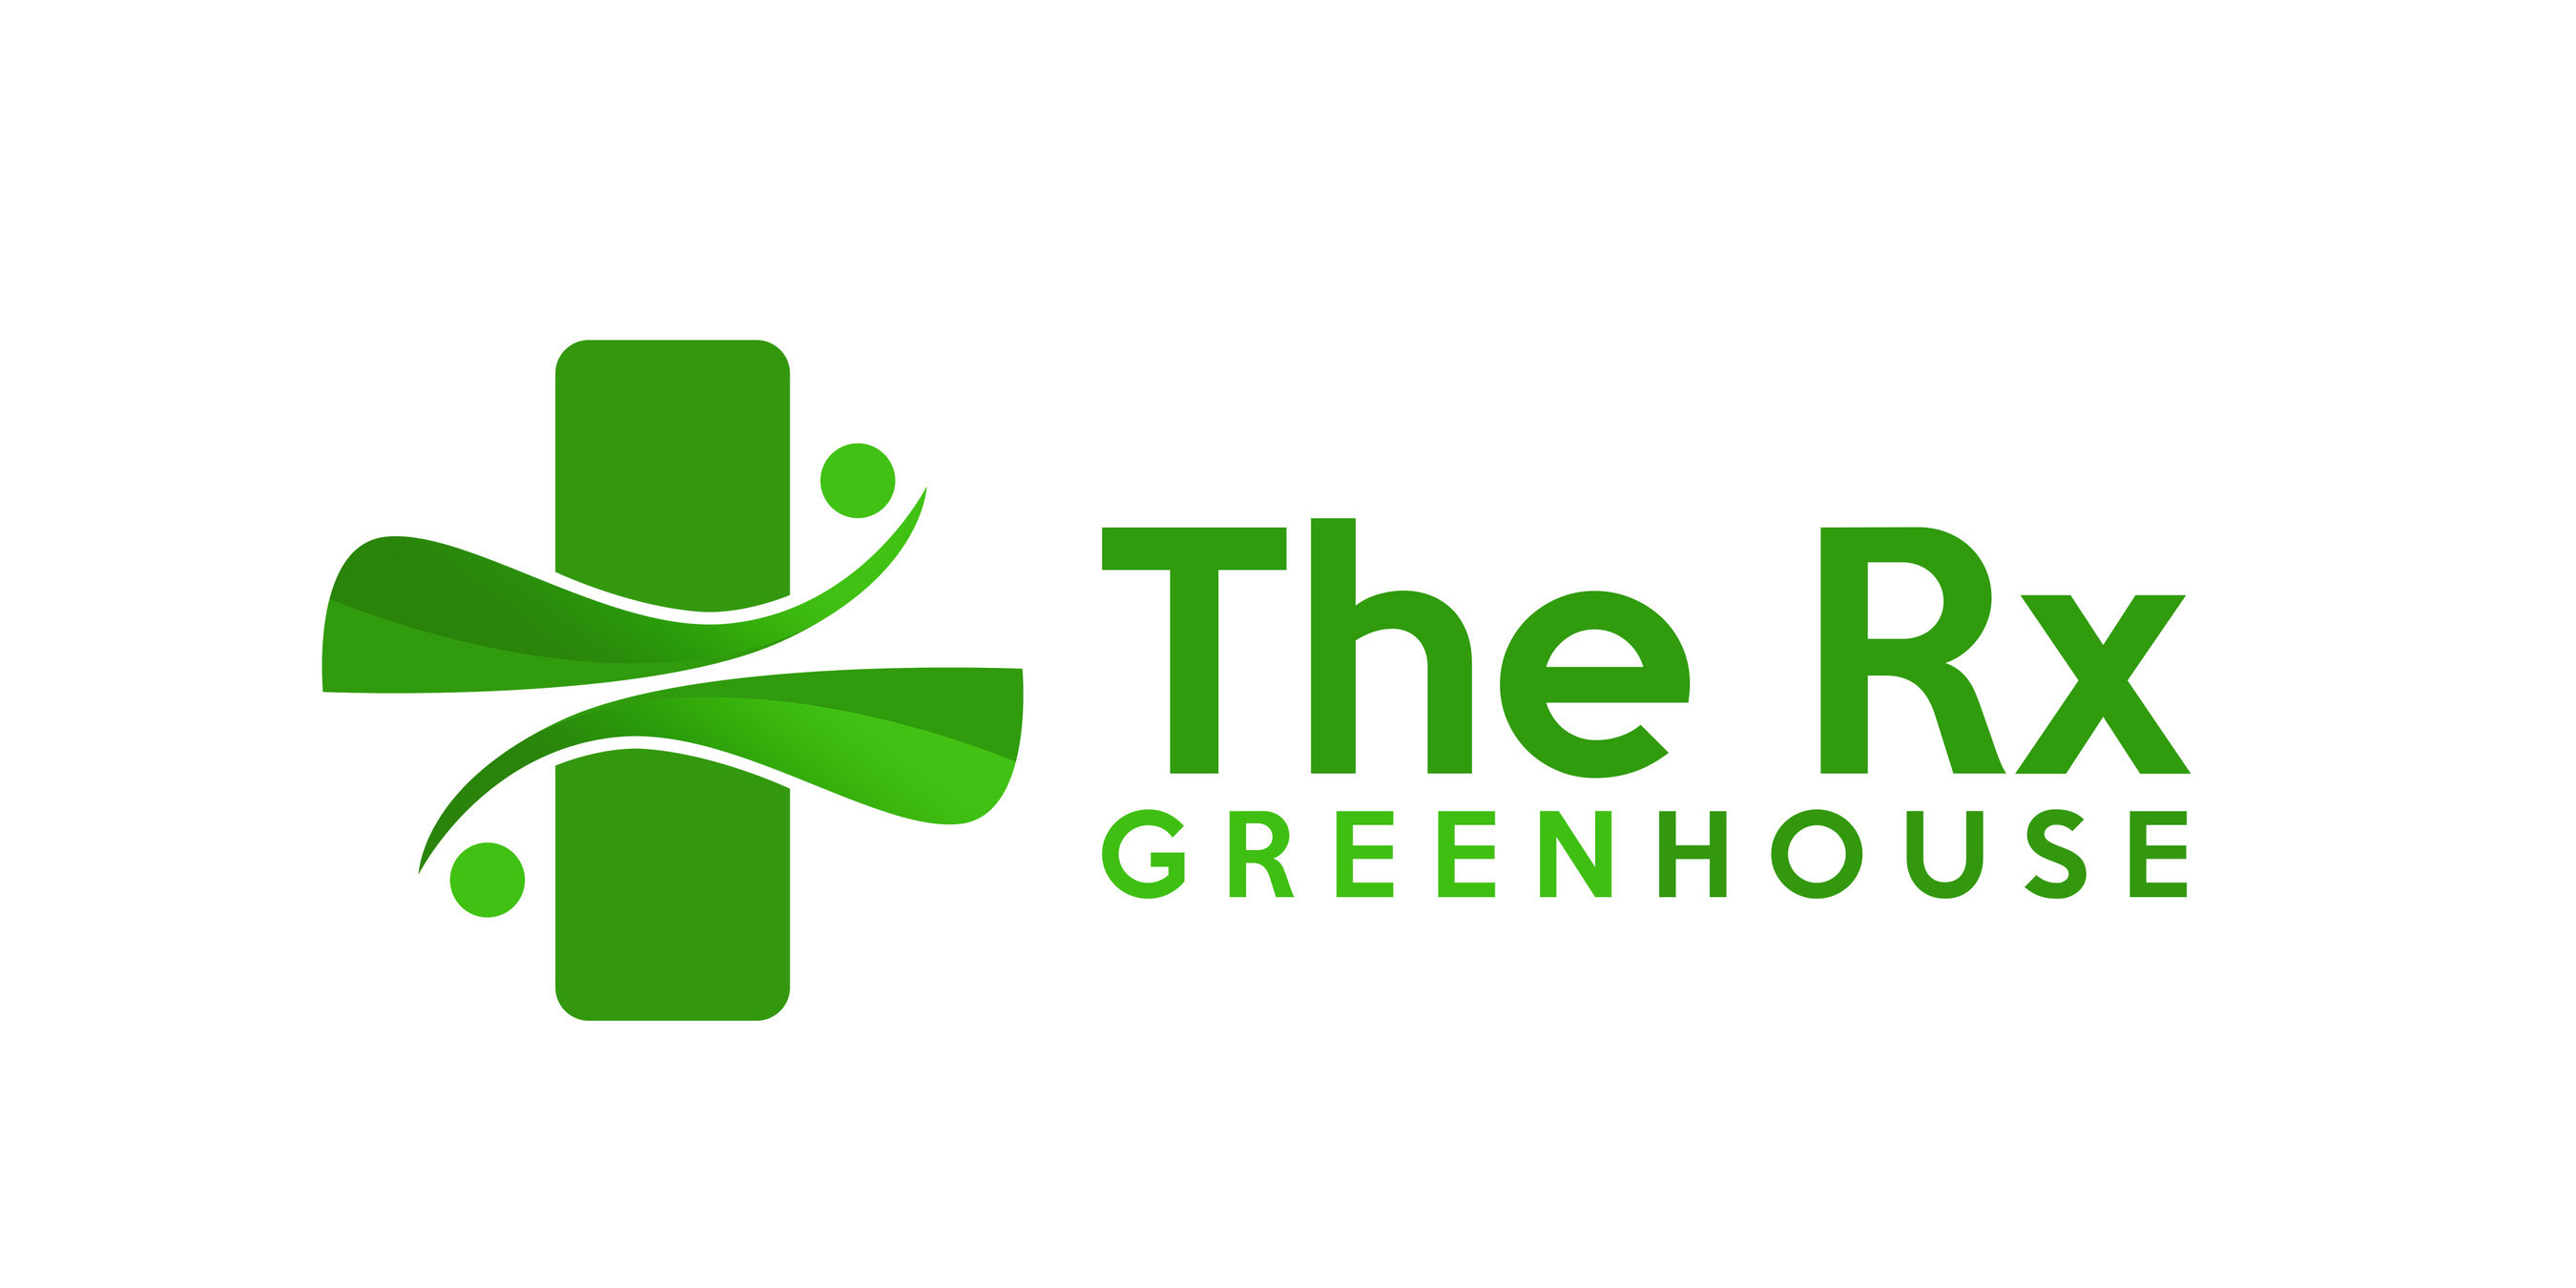 The Rx Greenhouse, a medical marijuana pharmacy, will be located in Metairie, LA and will serve the metropolitan area of New Orleans.